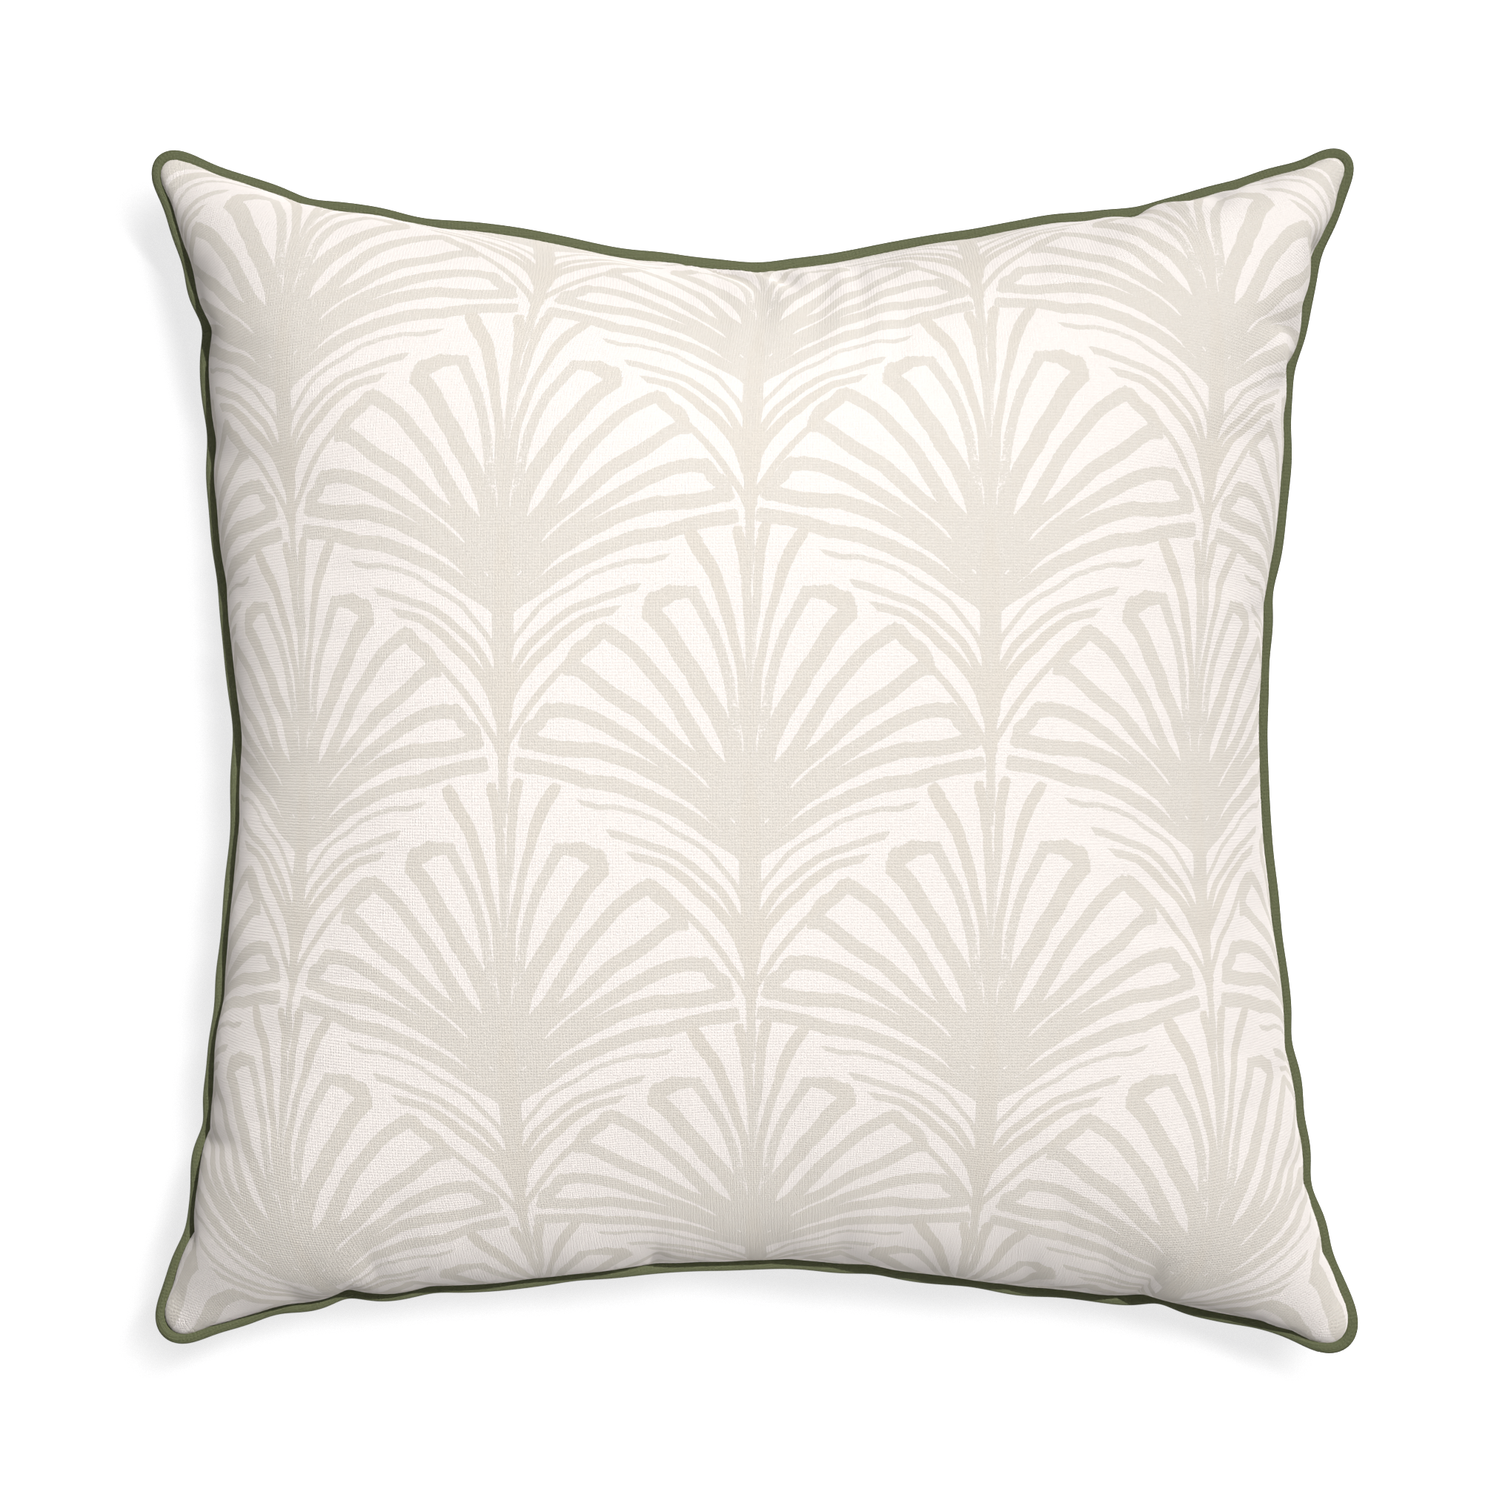 Euro-sham suzy sand custom pillow with f piping on white background